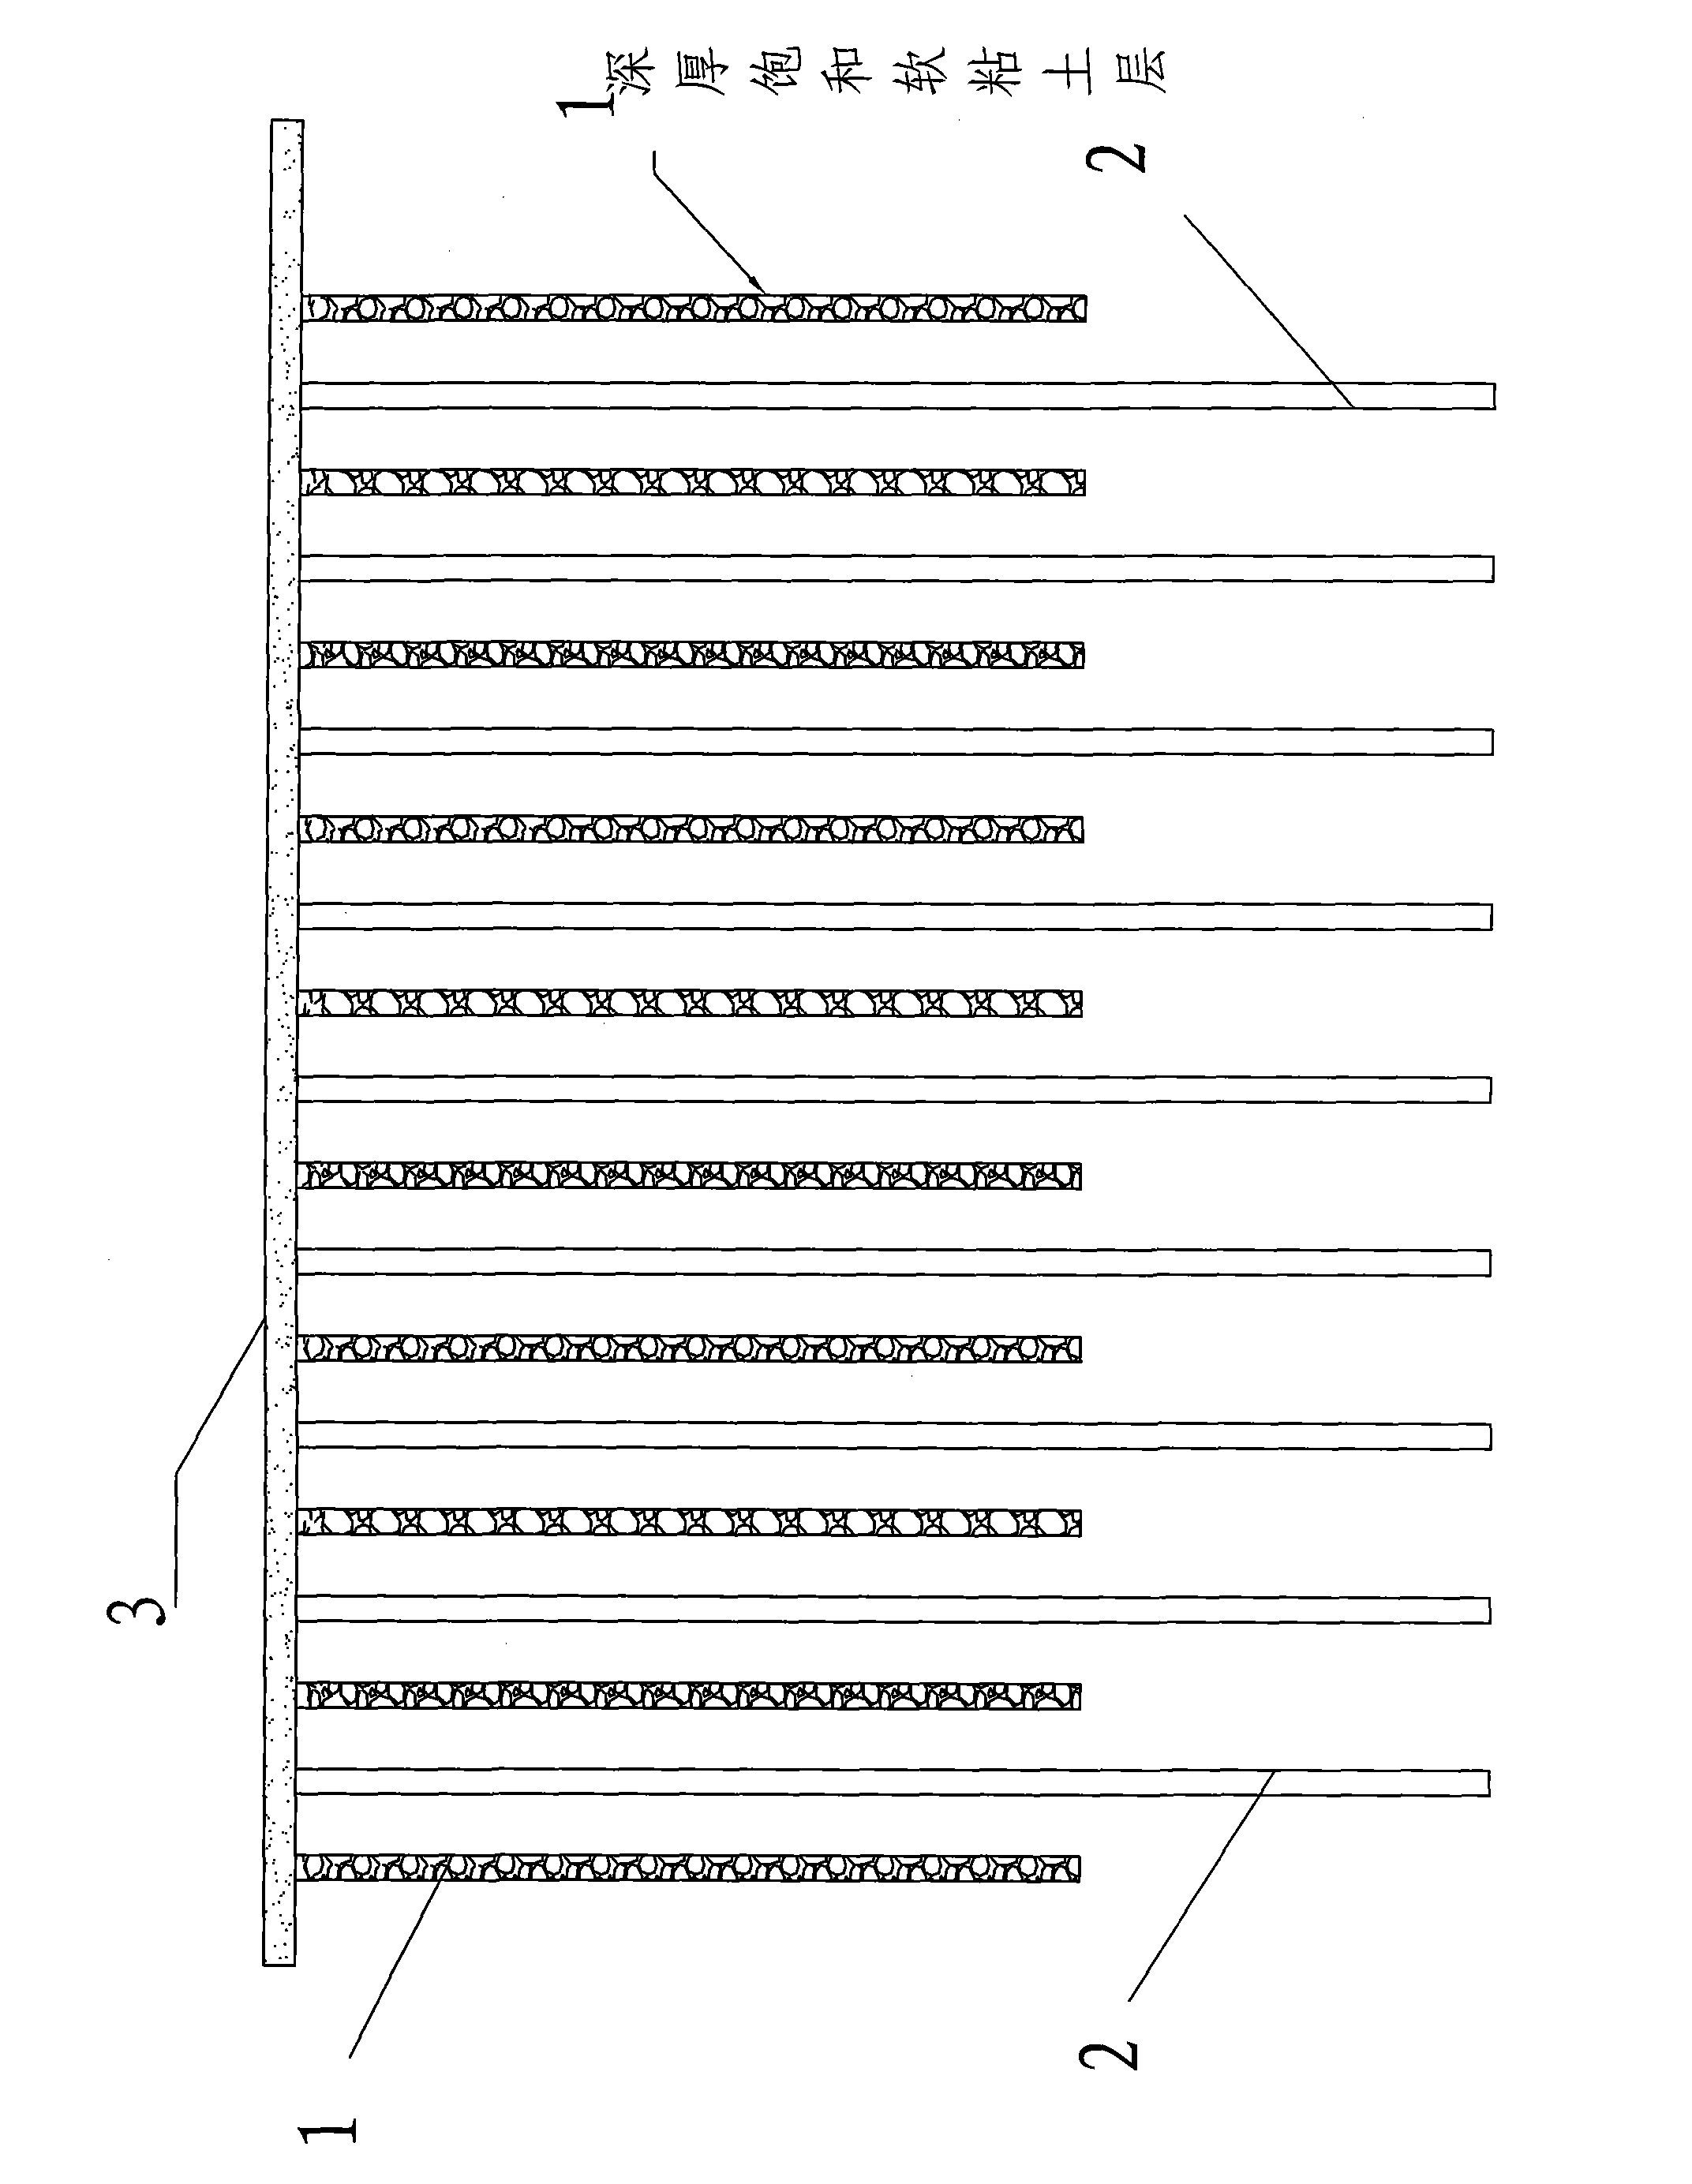 Method for treating spiral oil-extruding filling pile composite foundation in stratum containing soft clay